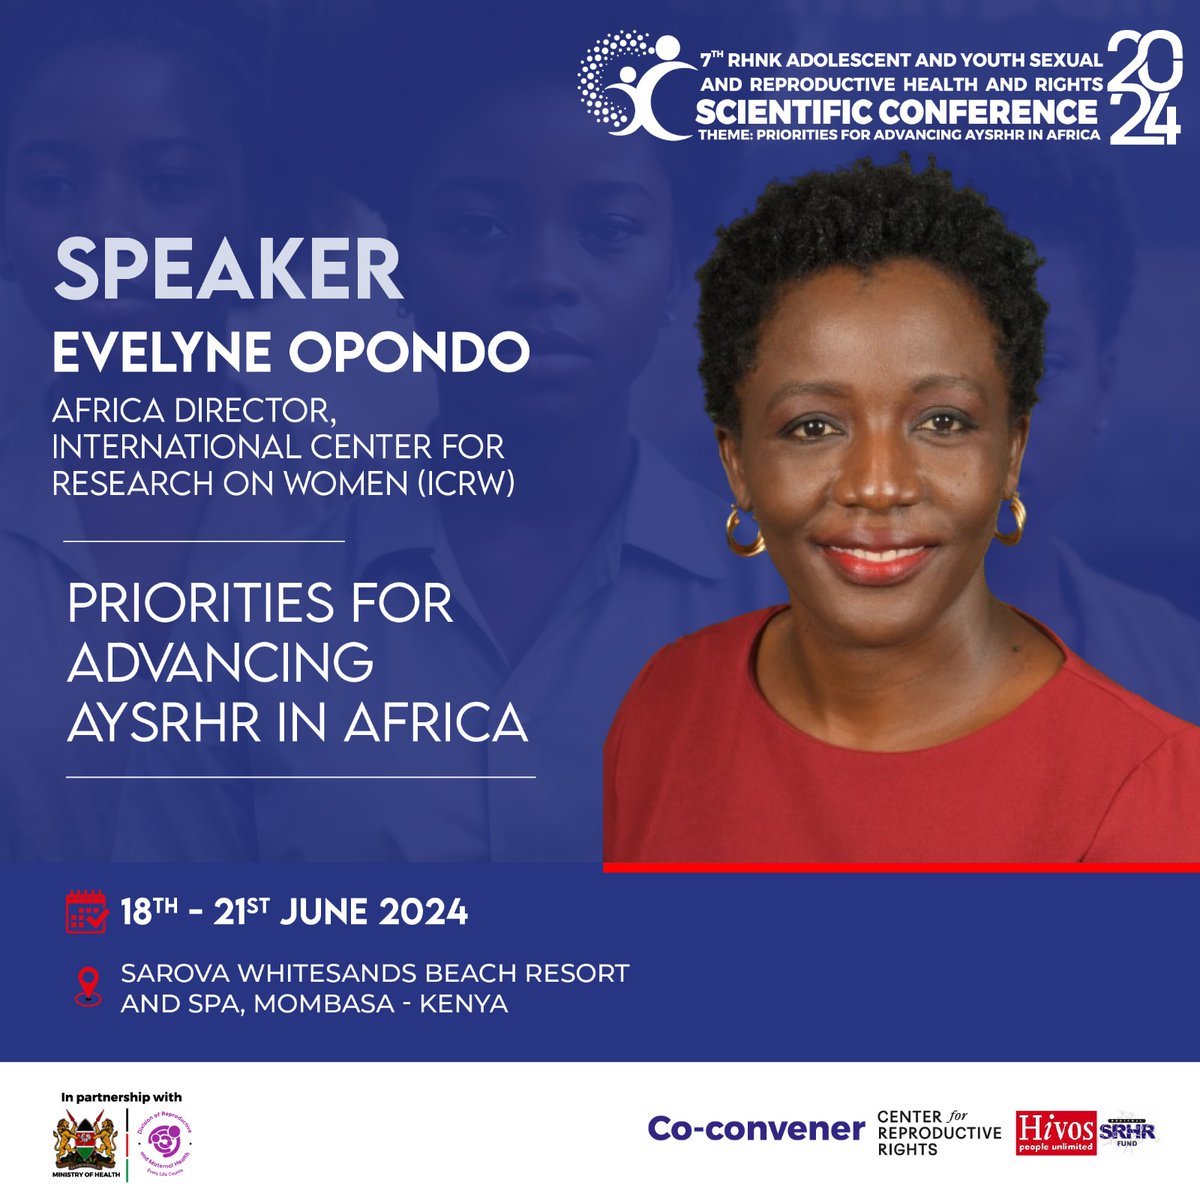 Join us at the #RHNKConference2024 to hear from our esteemed keynote speaker, Evelyne Opondo, Africa Director at the ICRW. Gain valuable insights on priorities for advancing AYSRHR. 
@MOH_Kenya @rhnkorg @IPPFAR